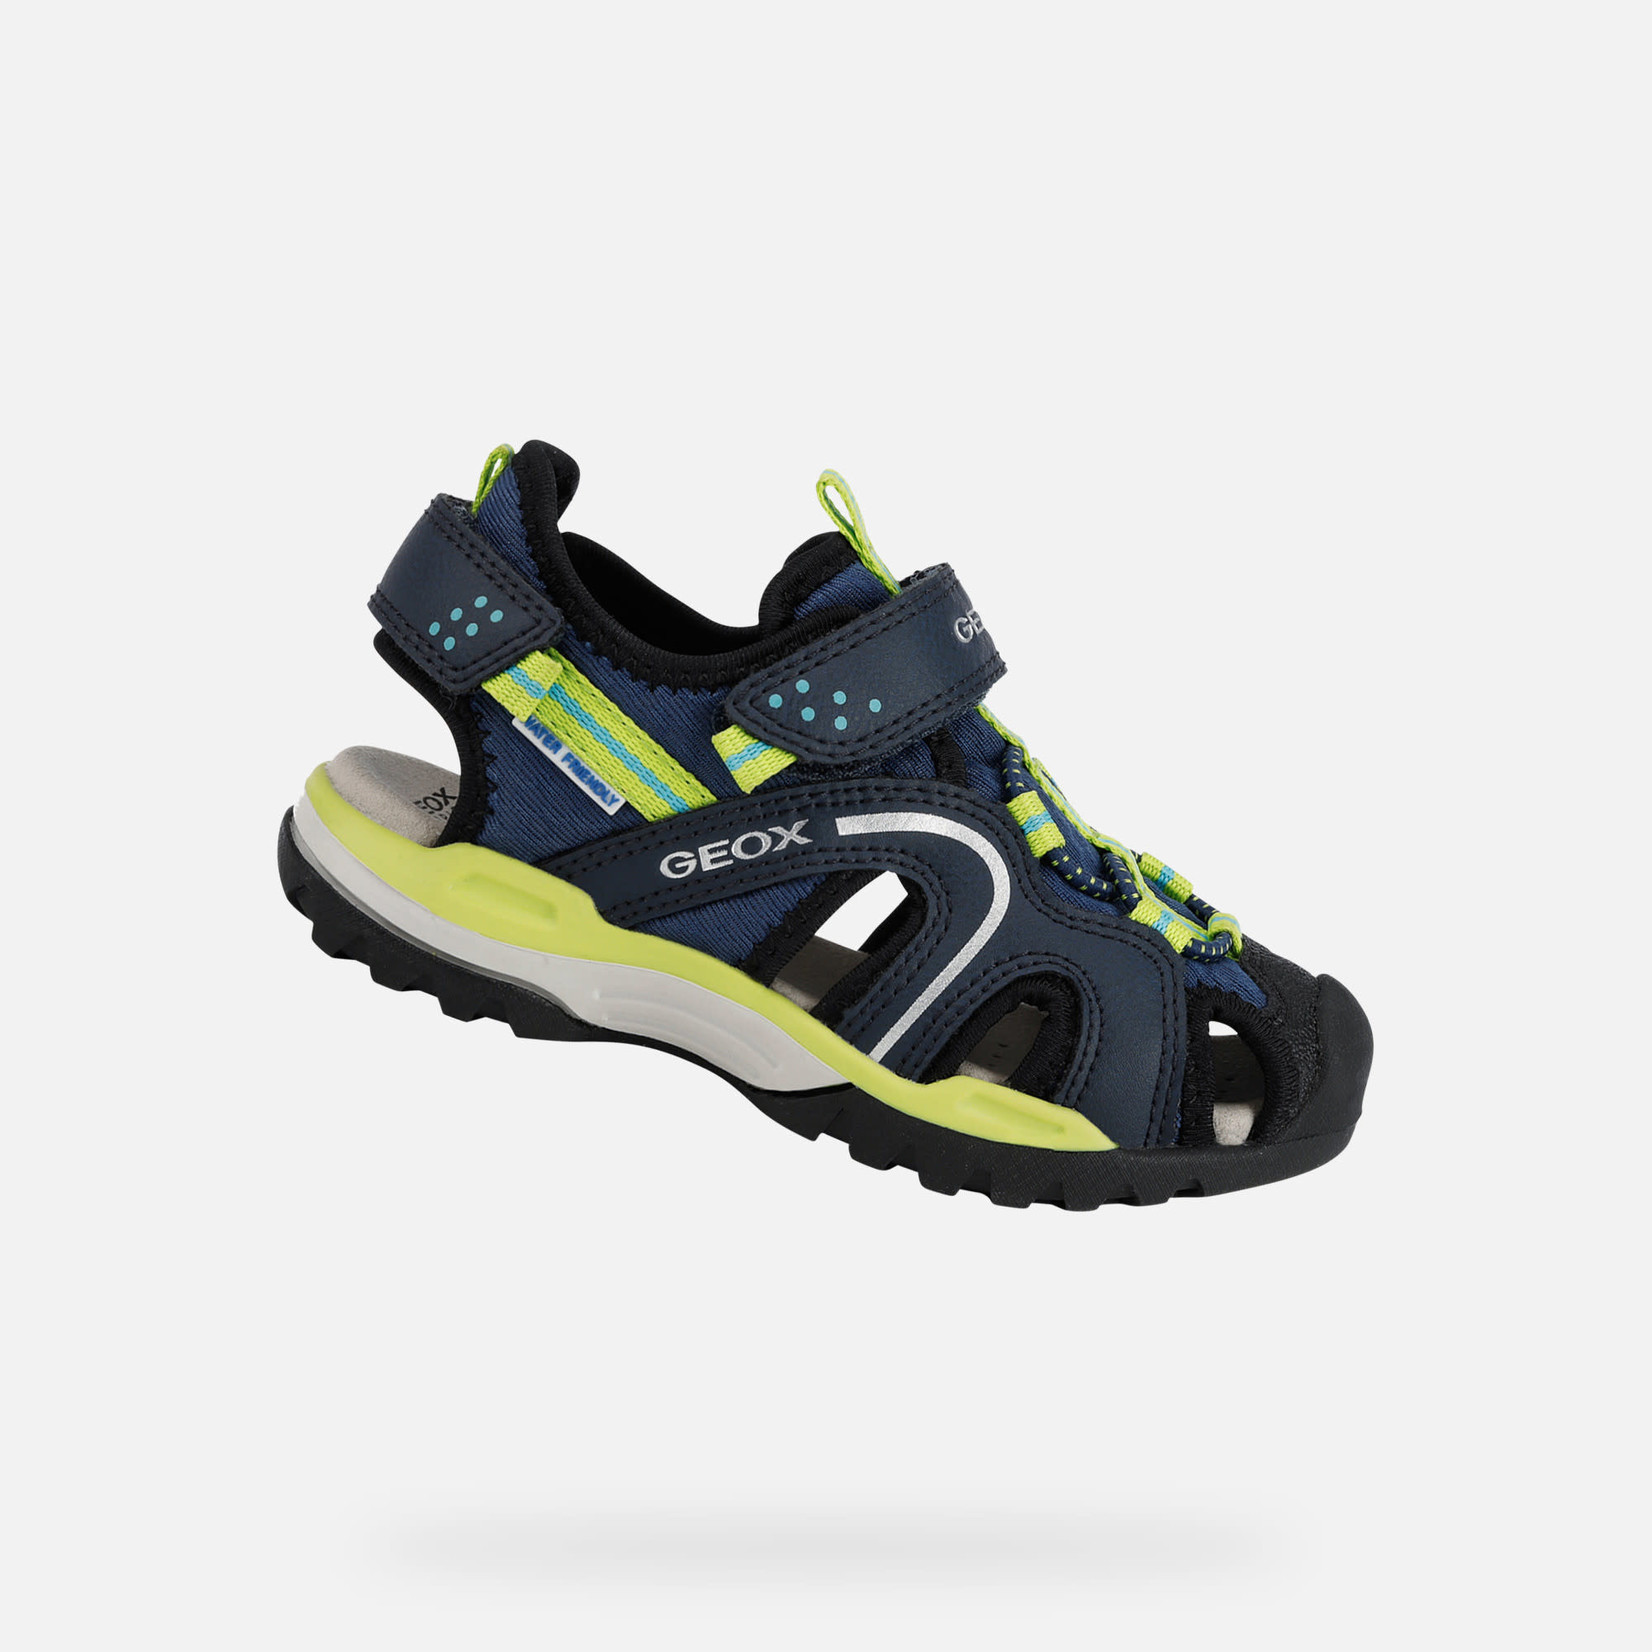 Geox GEOX - Borealis sport sandal in navy blue and neon green